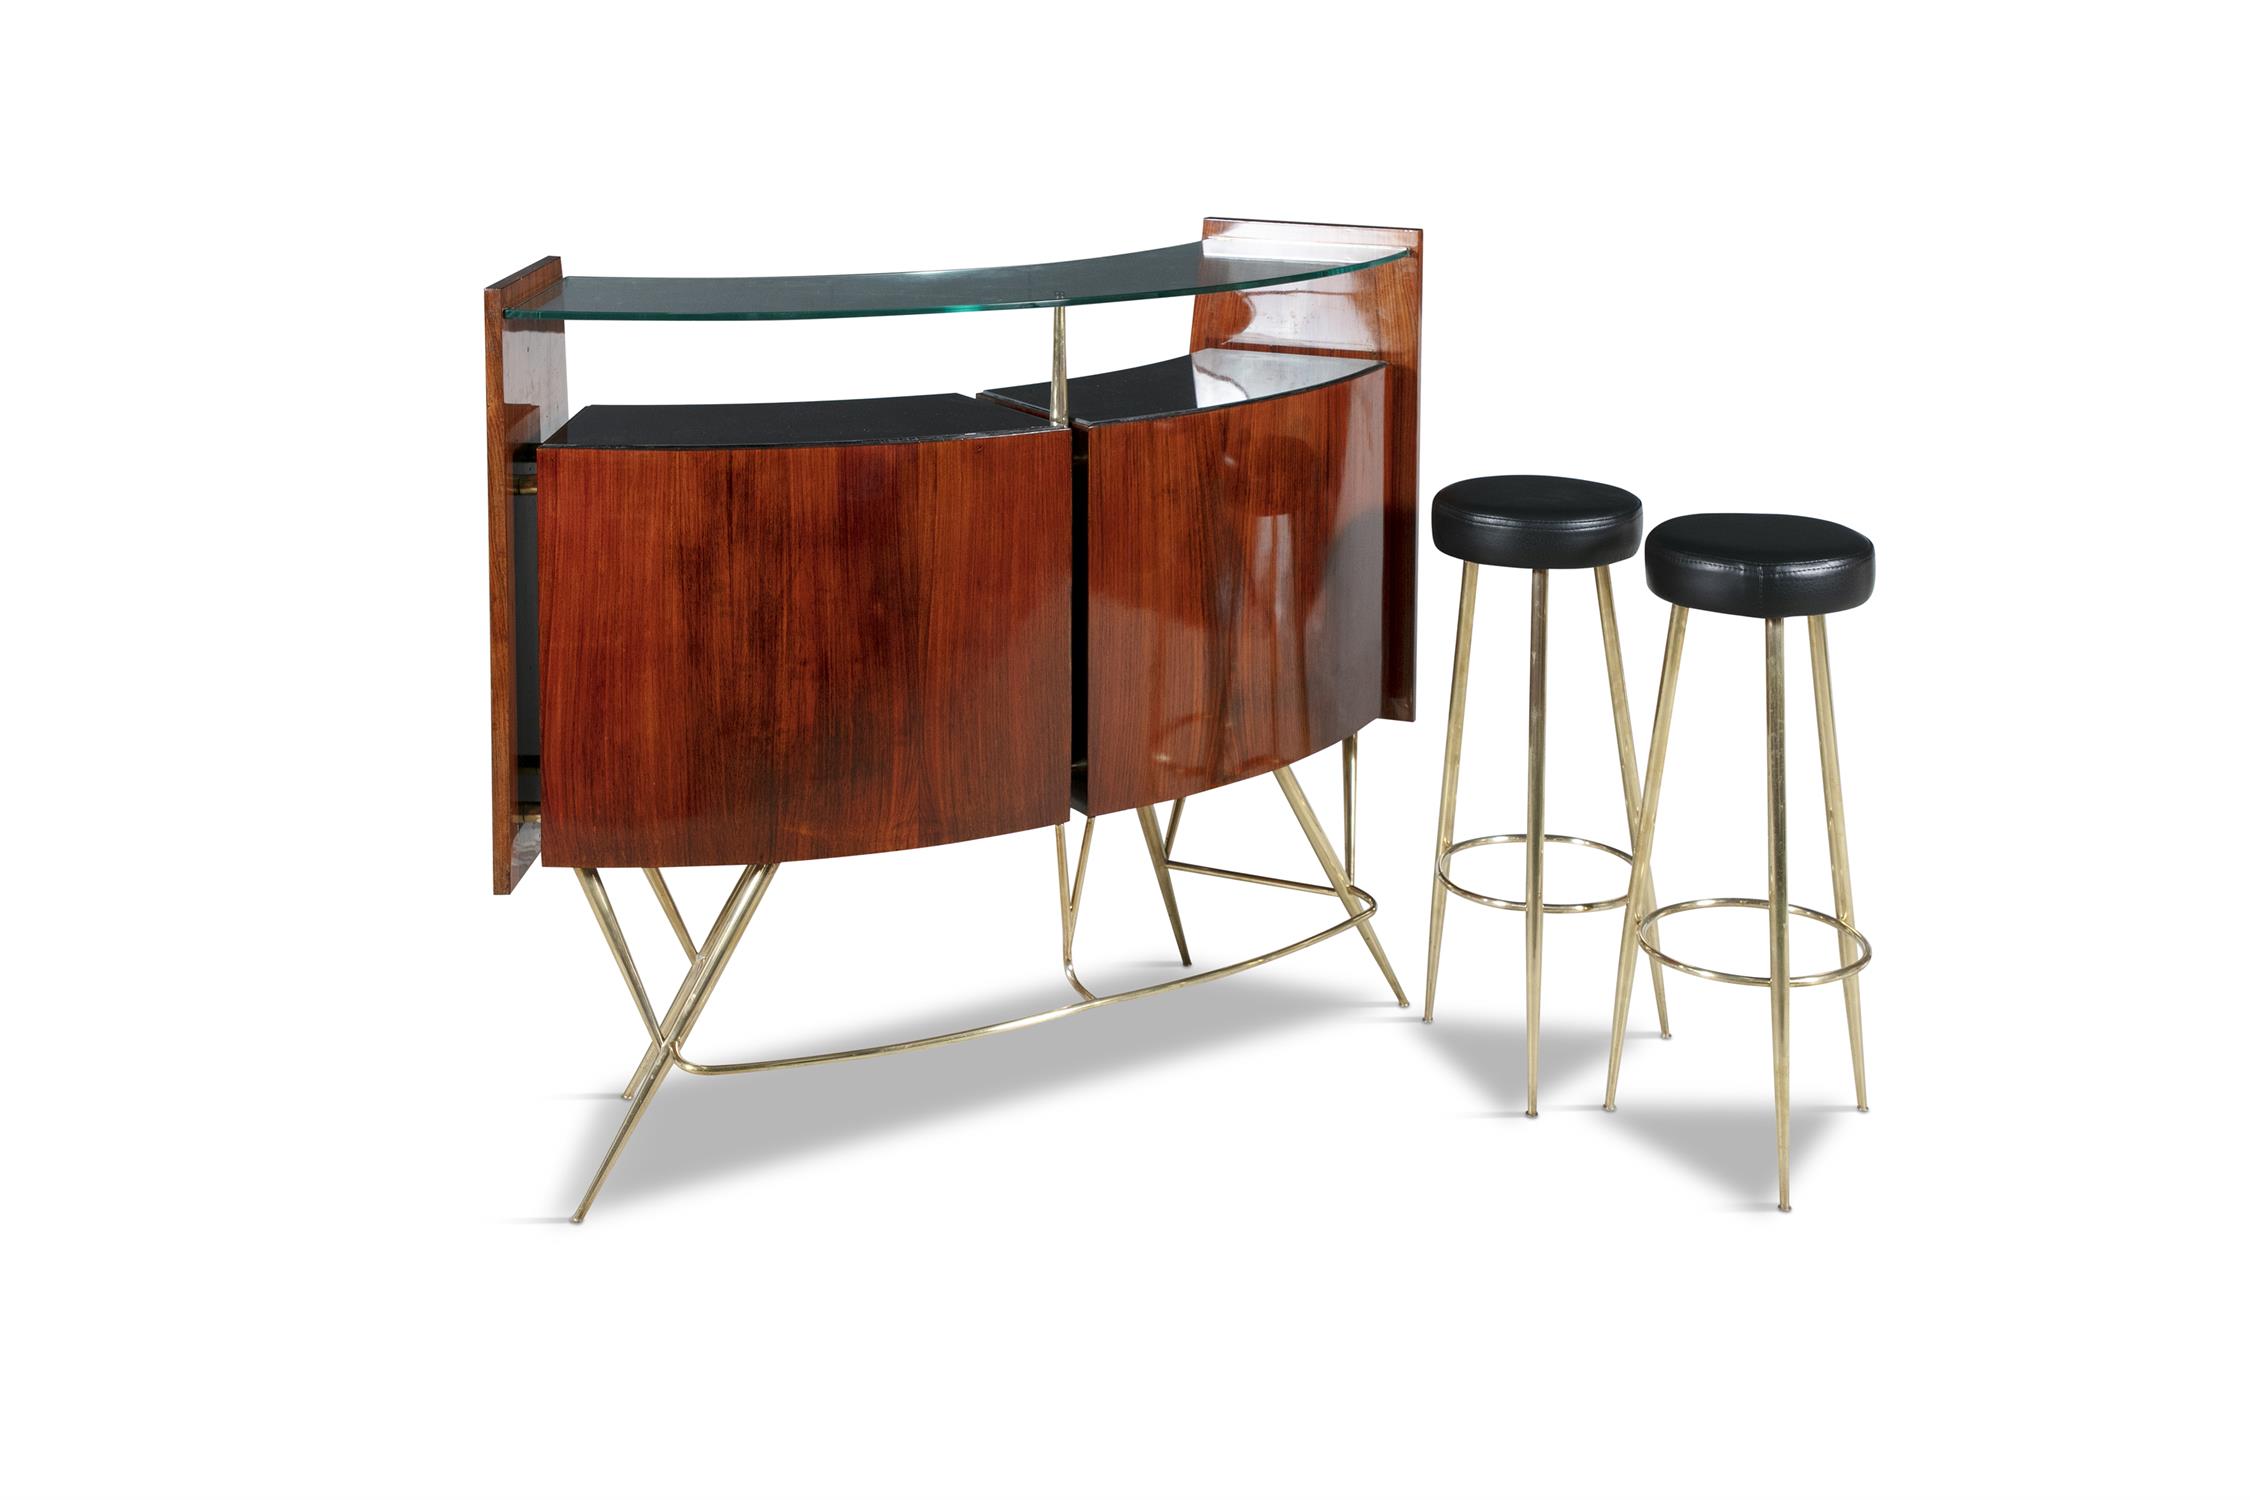 BAR SET A rosewood and brass bar set, complete with two stools and a curved glass top, Italy c. - Image 5 of 14